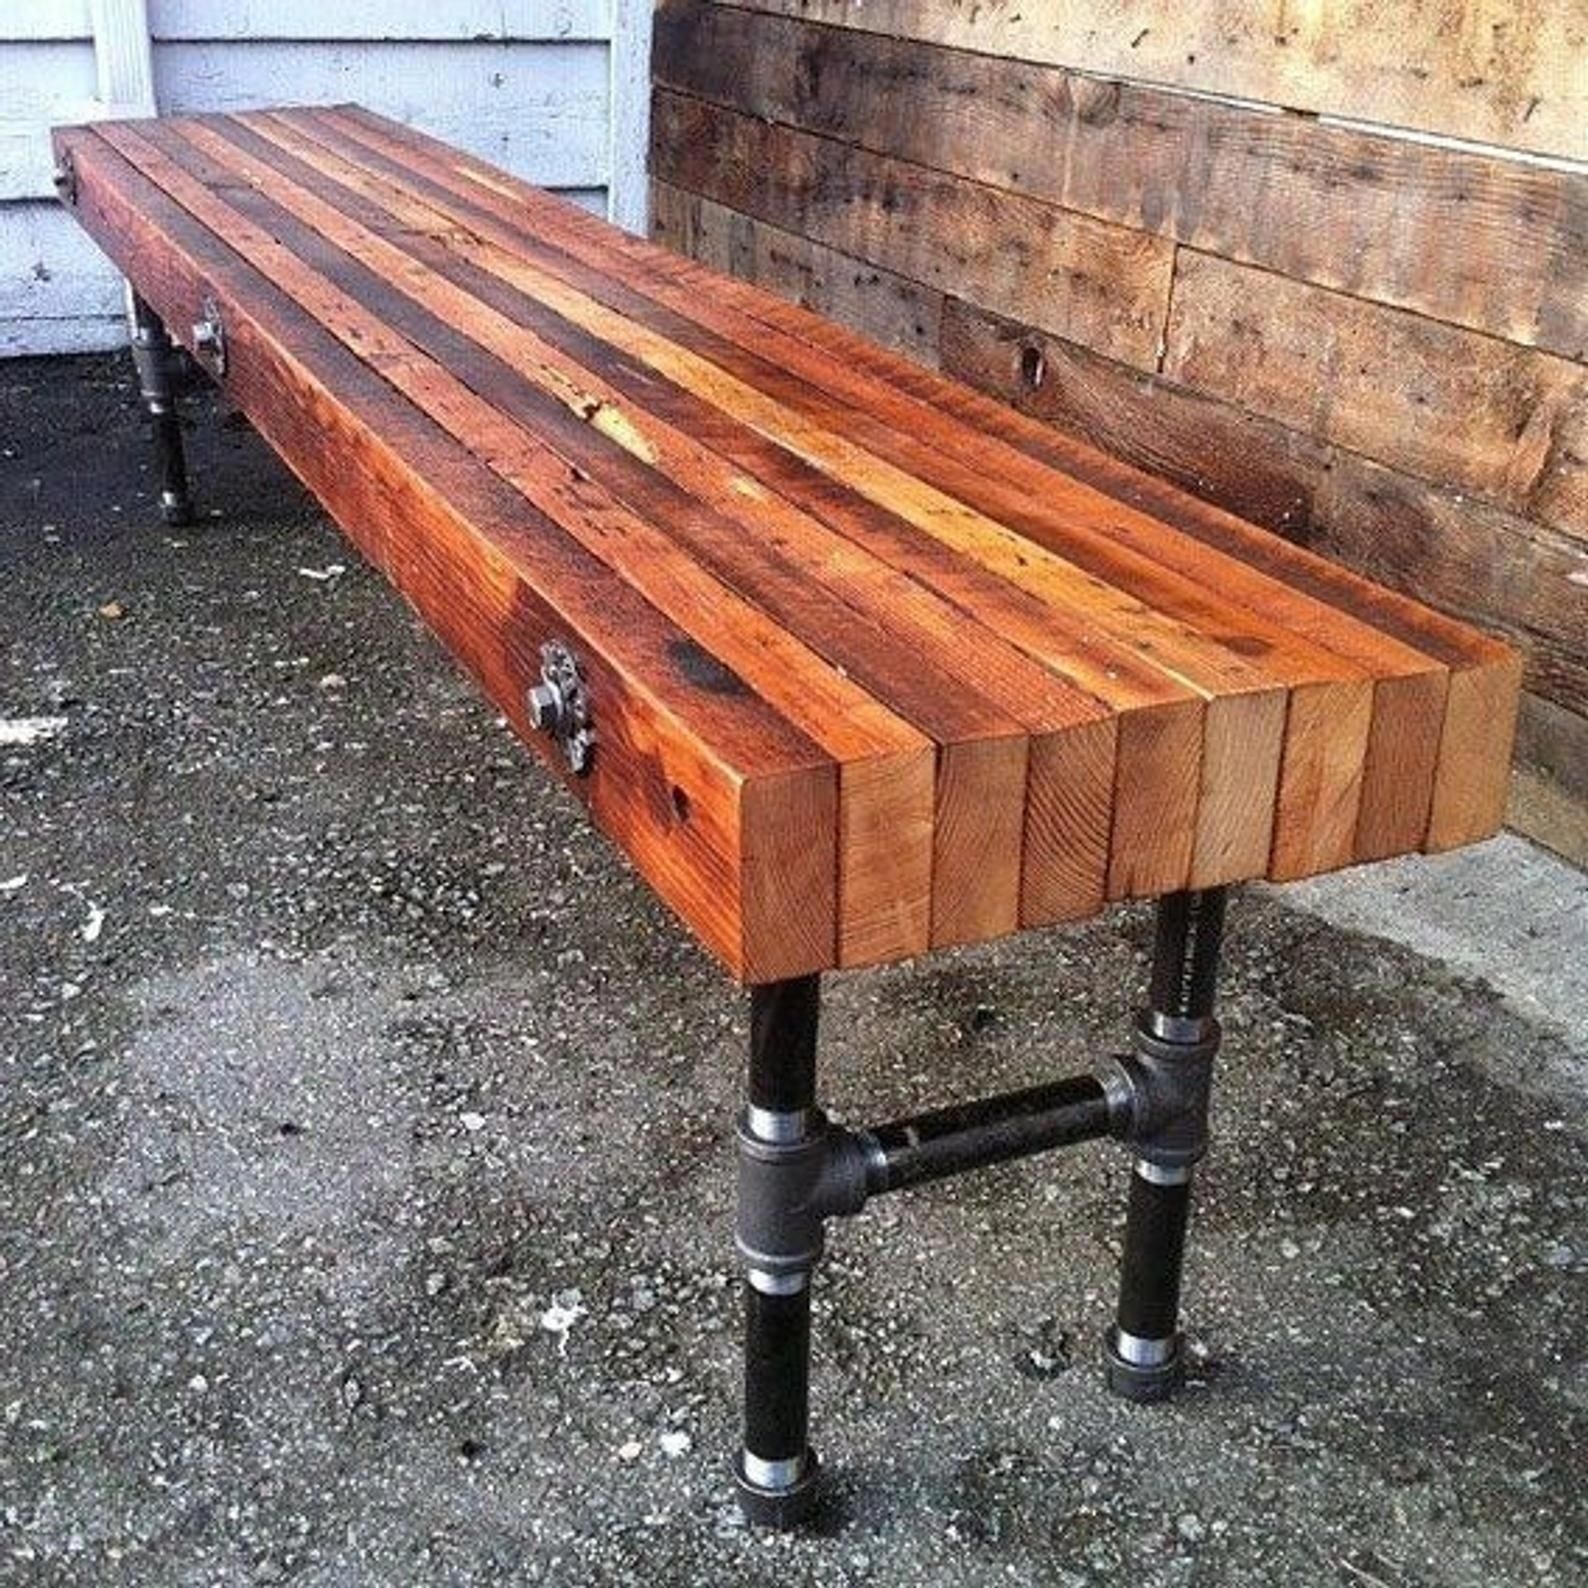 Custom made reclaimed wood bench with industrial cast iron legs